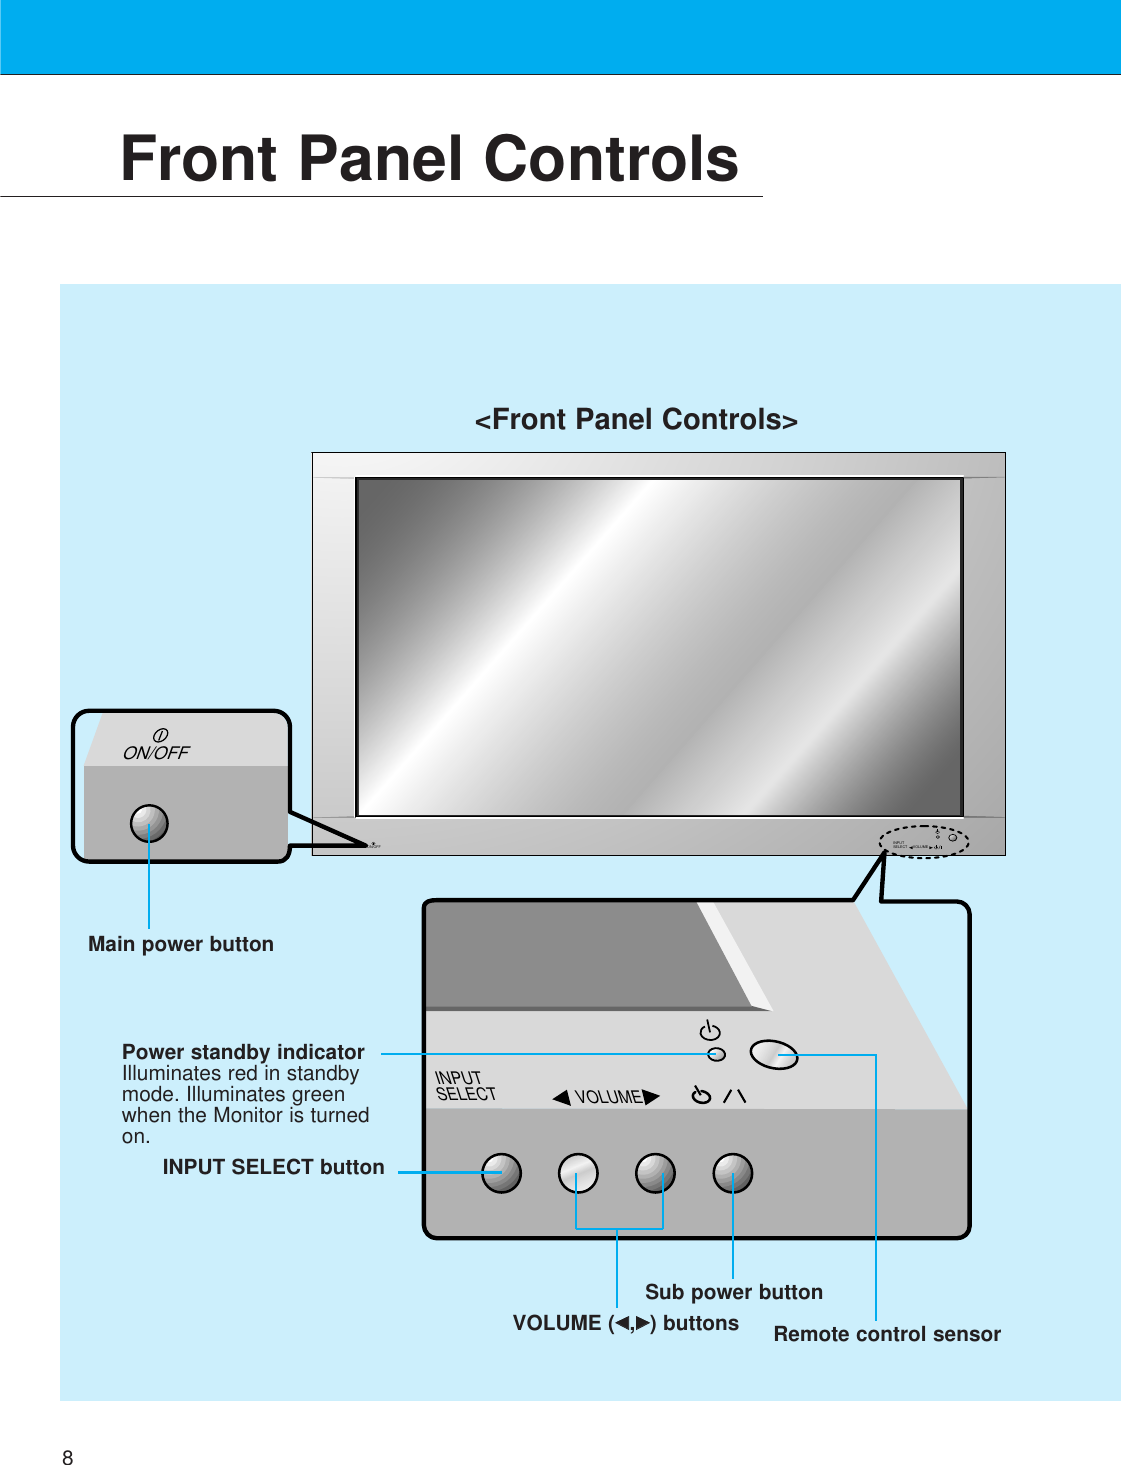 8Front Panel ControlsON/OFFON/OFF INPUT SELECT VOLUME INPUT SELECT VOLUME&lt;Front Panel Controls&gt;Main power buttonINPUT SELECT buttonPower standby indicatorIlluminates red in standbymode. Illuminates greenwhen the Monitor is turnedon.Sub power buttonVOLUME (FF,GG) buttons Remote control sensor